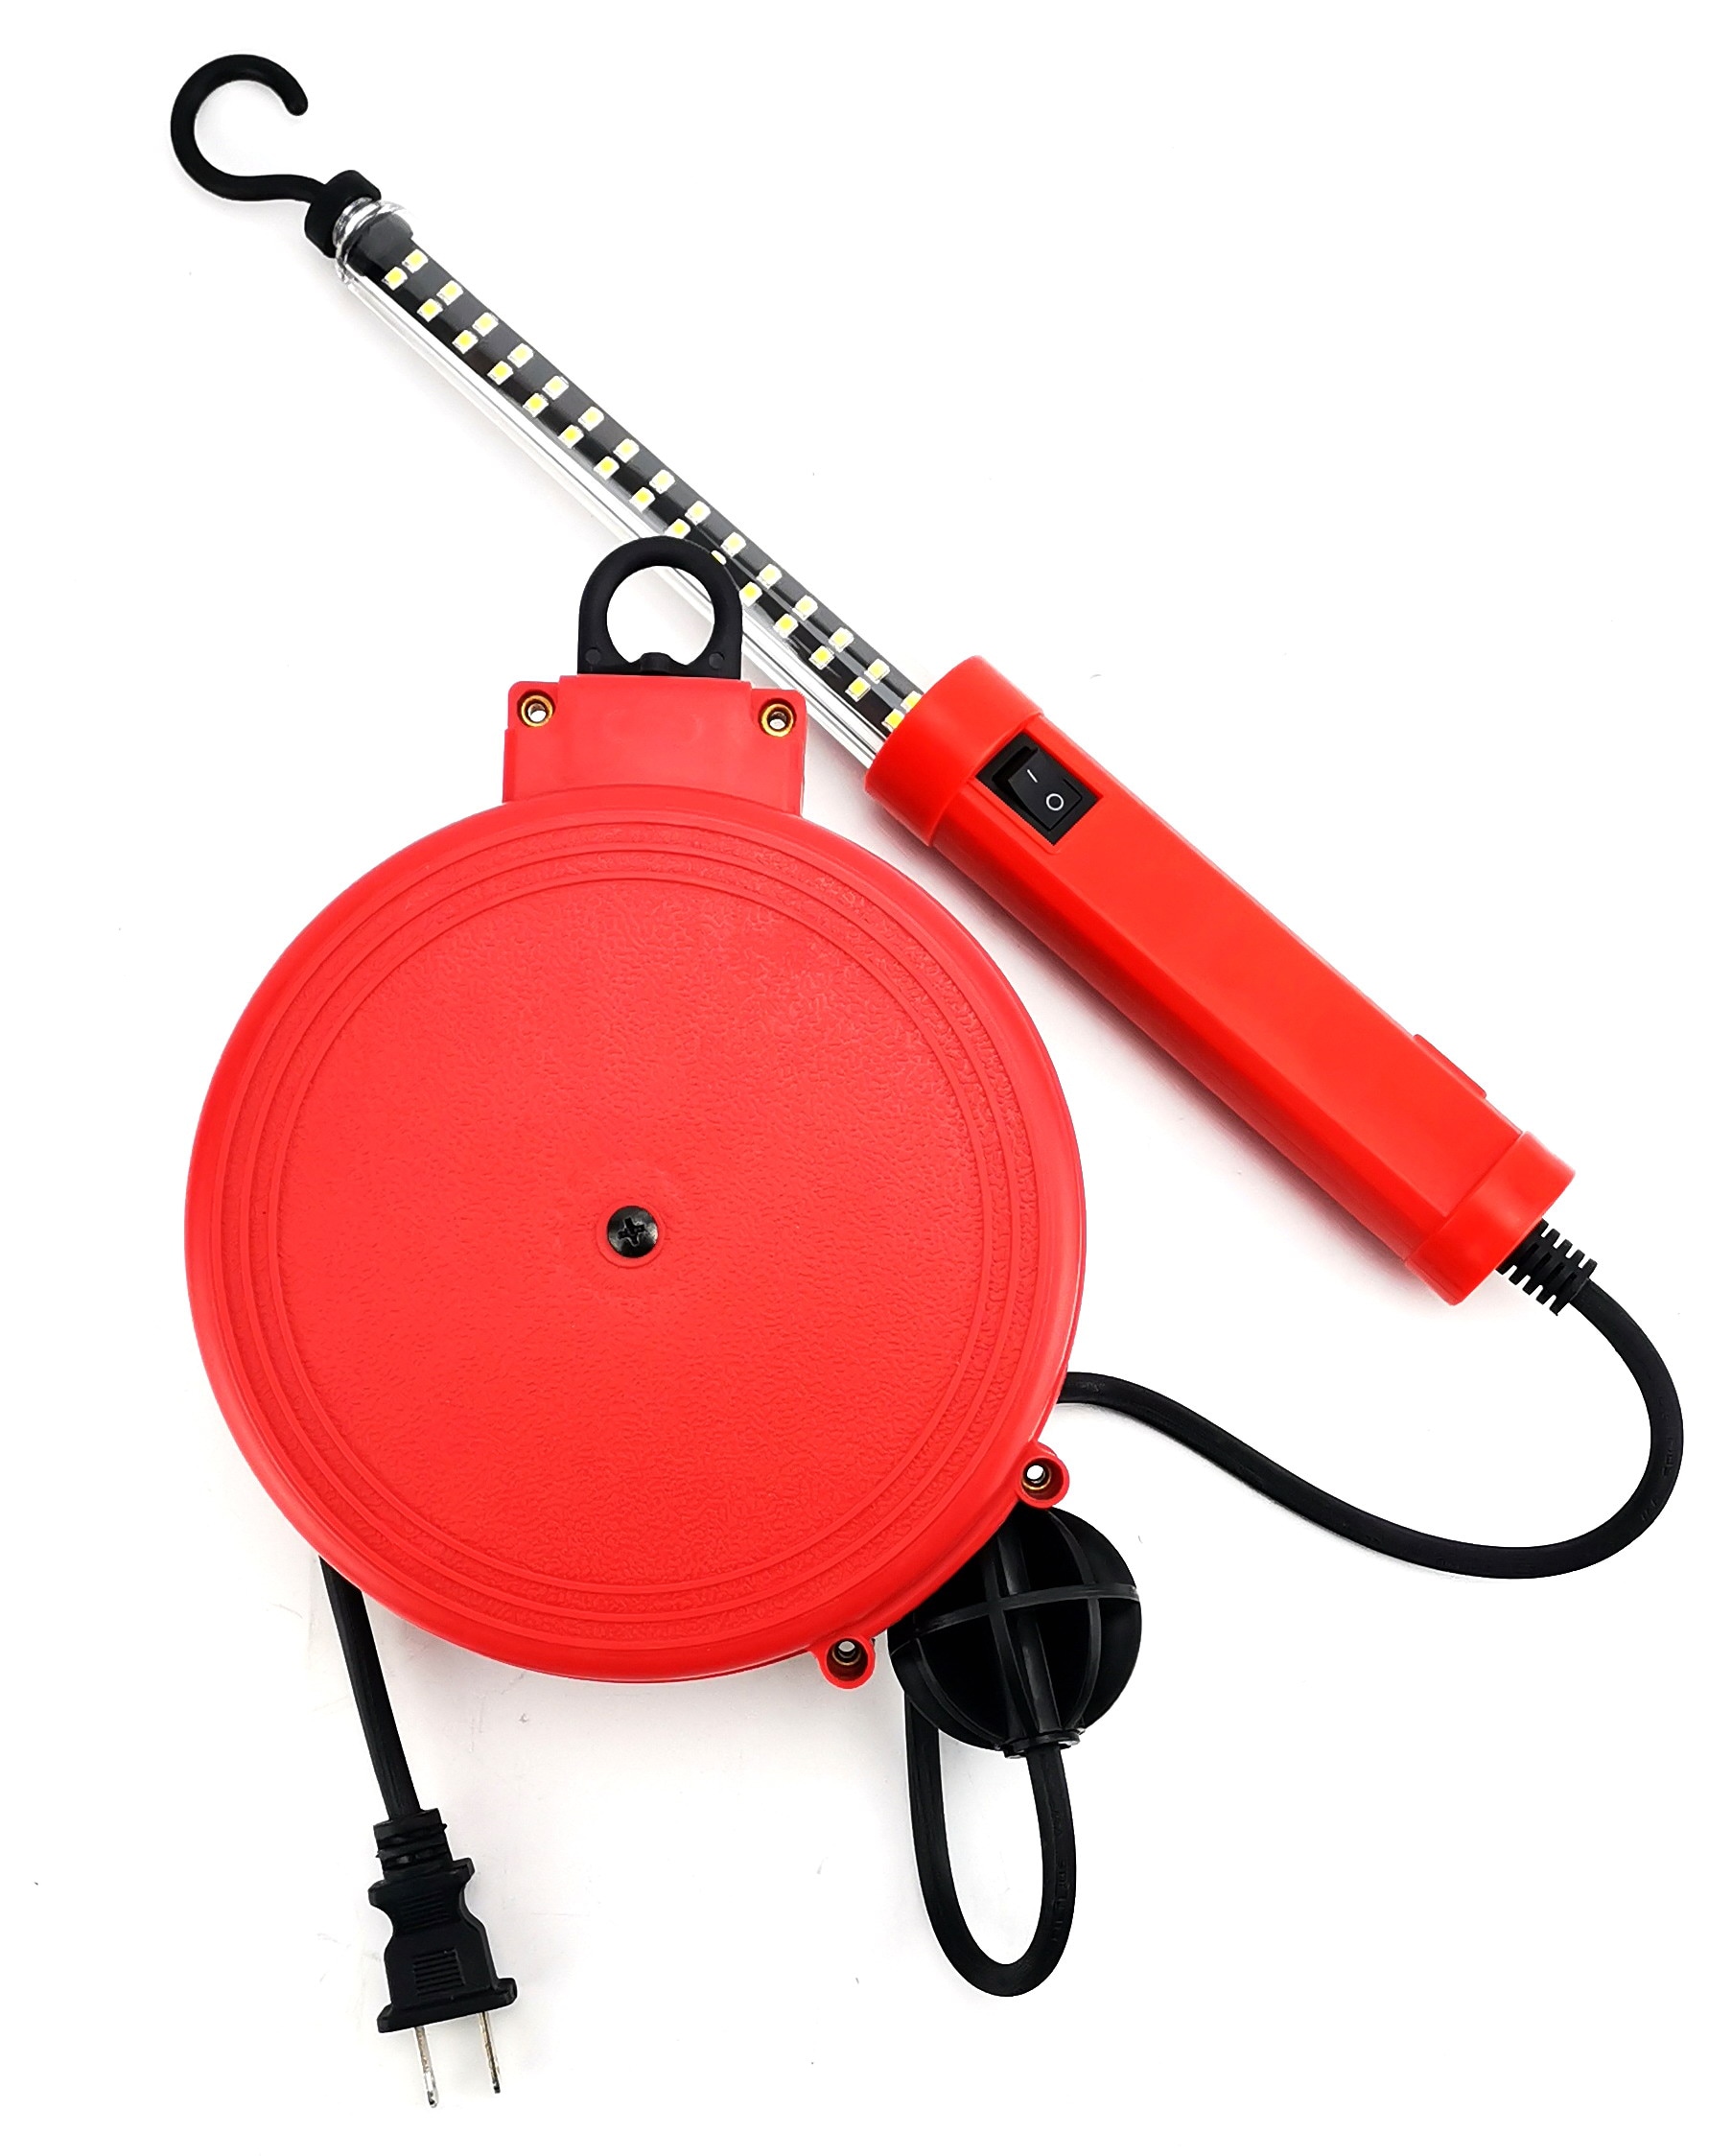 Utilitech Utilitech 20 Ft. Retractable Cord Reel with Work Light in the